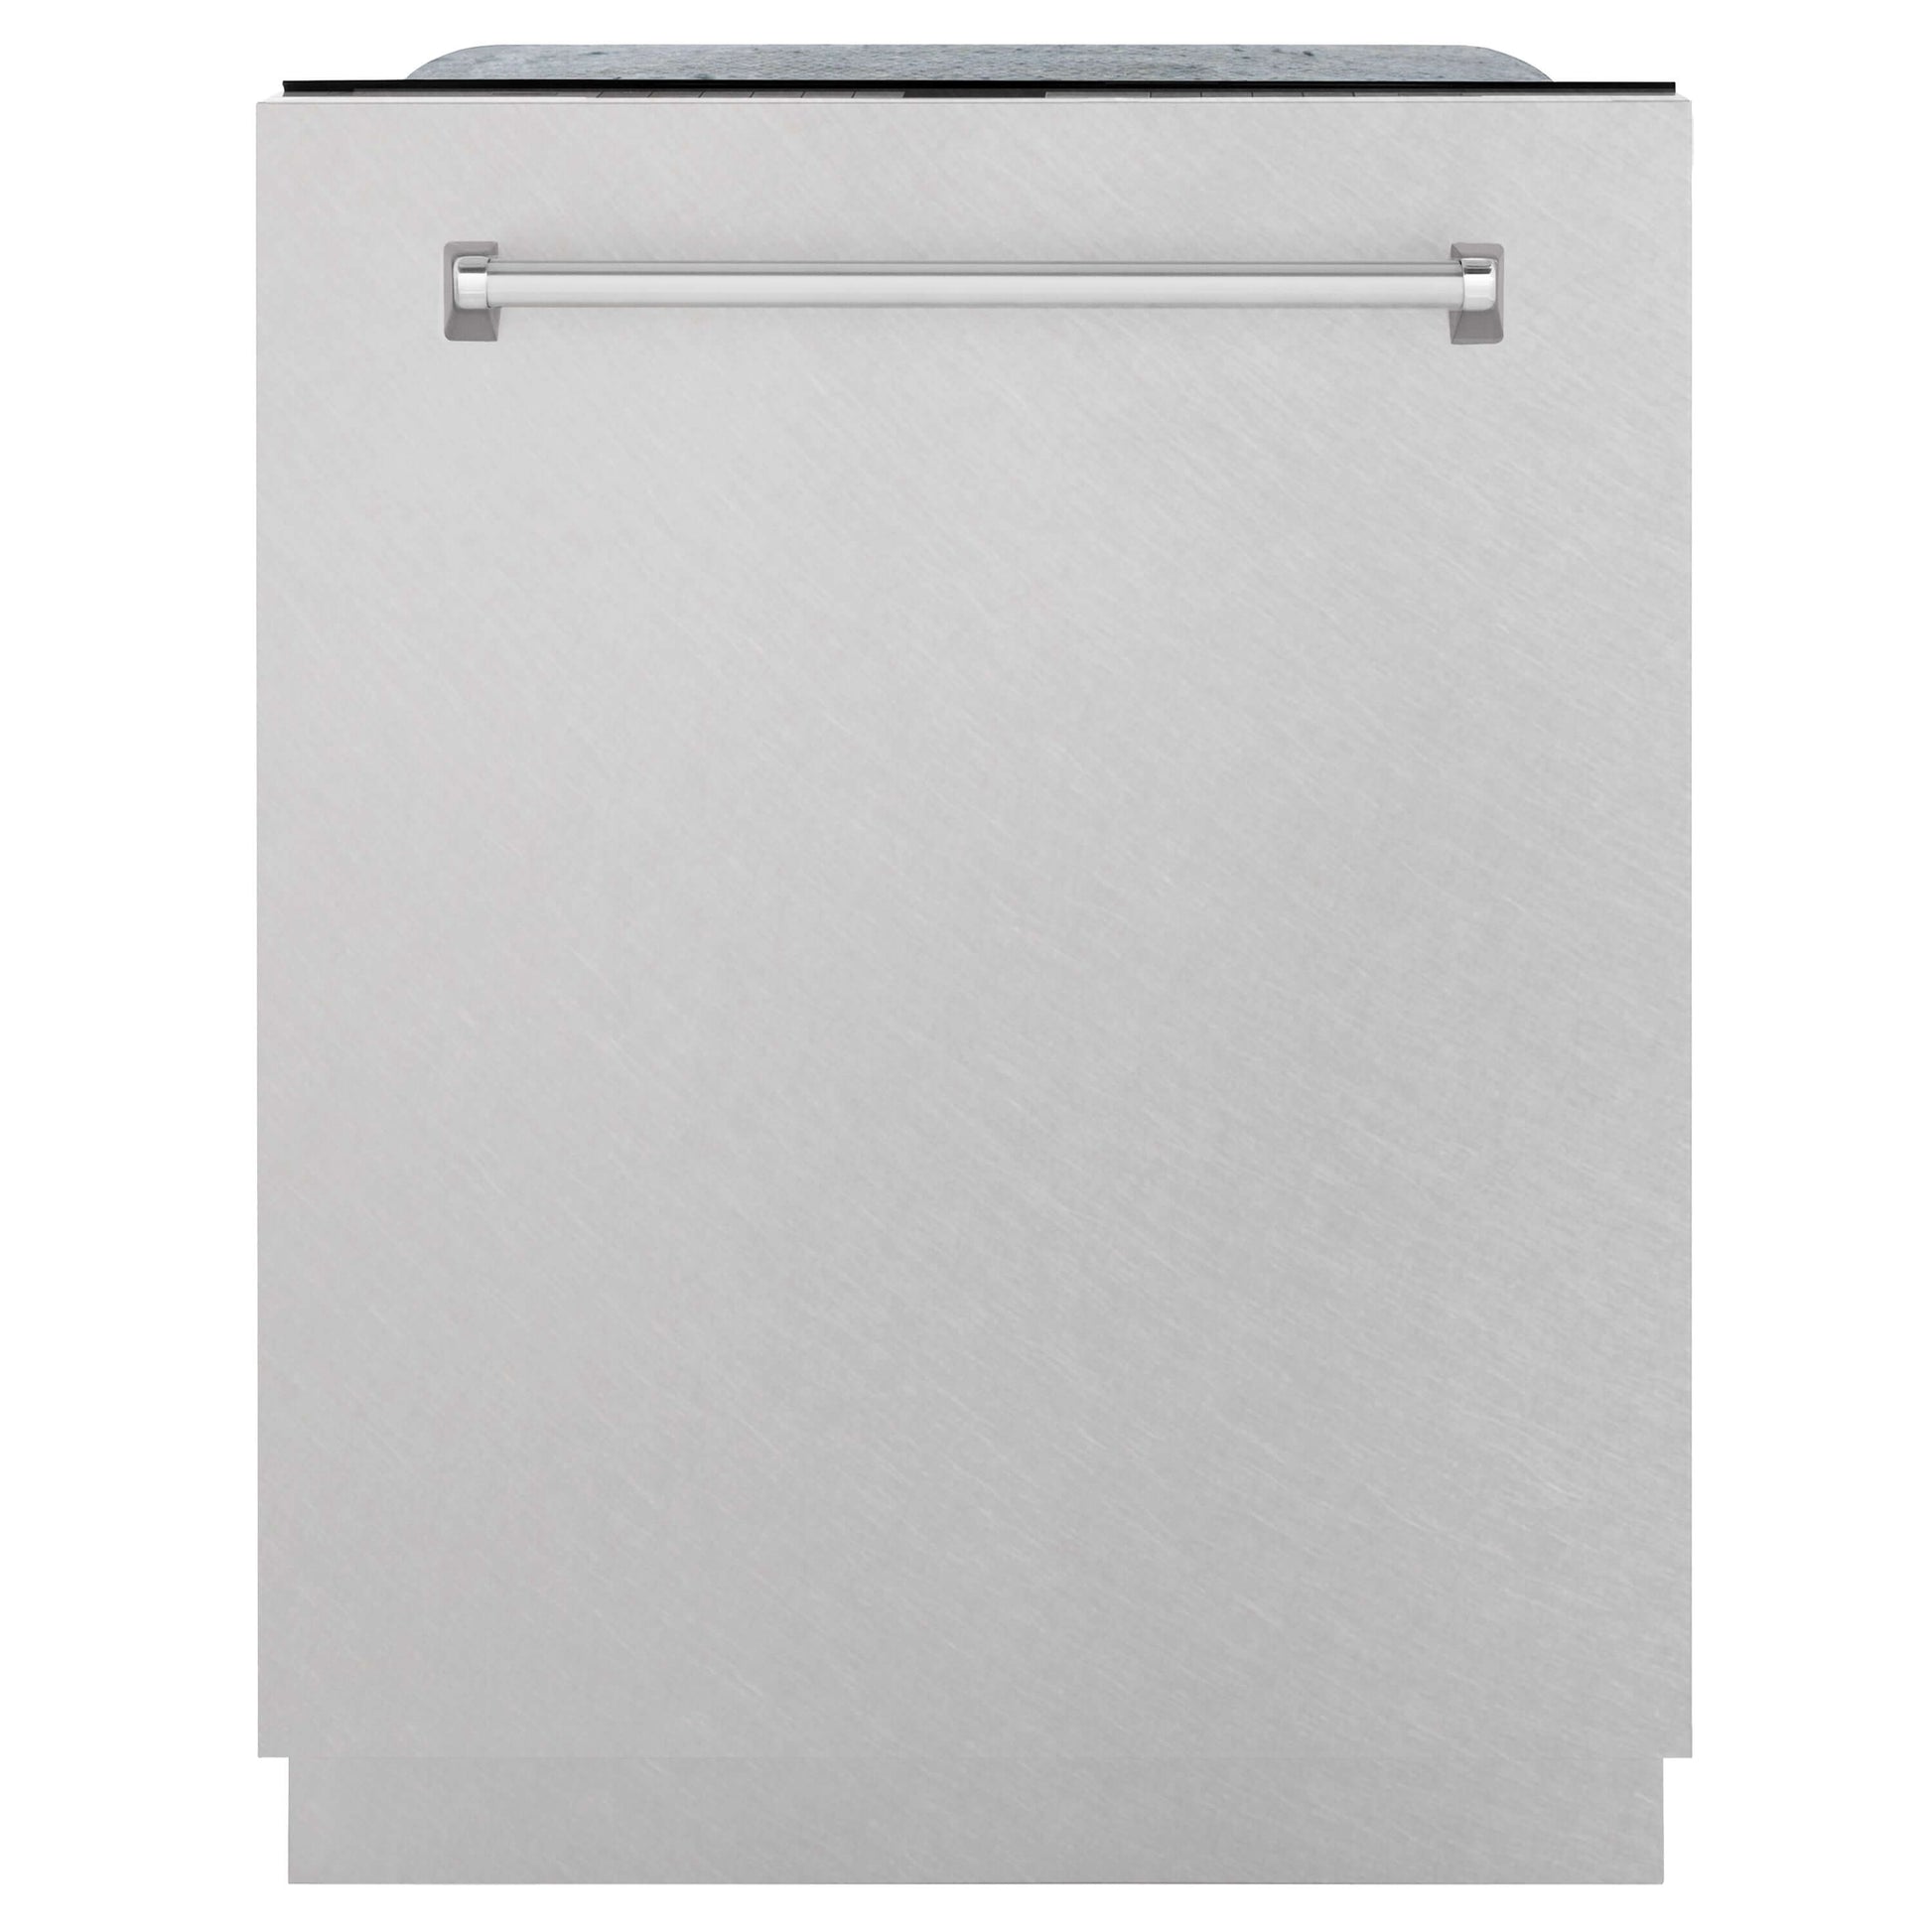 ZLINE 24" Panel  Monument Series 3rd Rack Top Touch Control Dishwasher - Stainless Tub with Color options